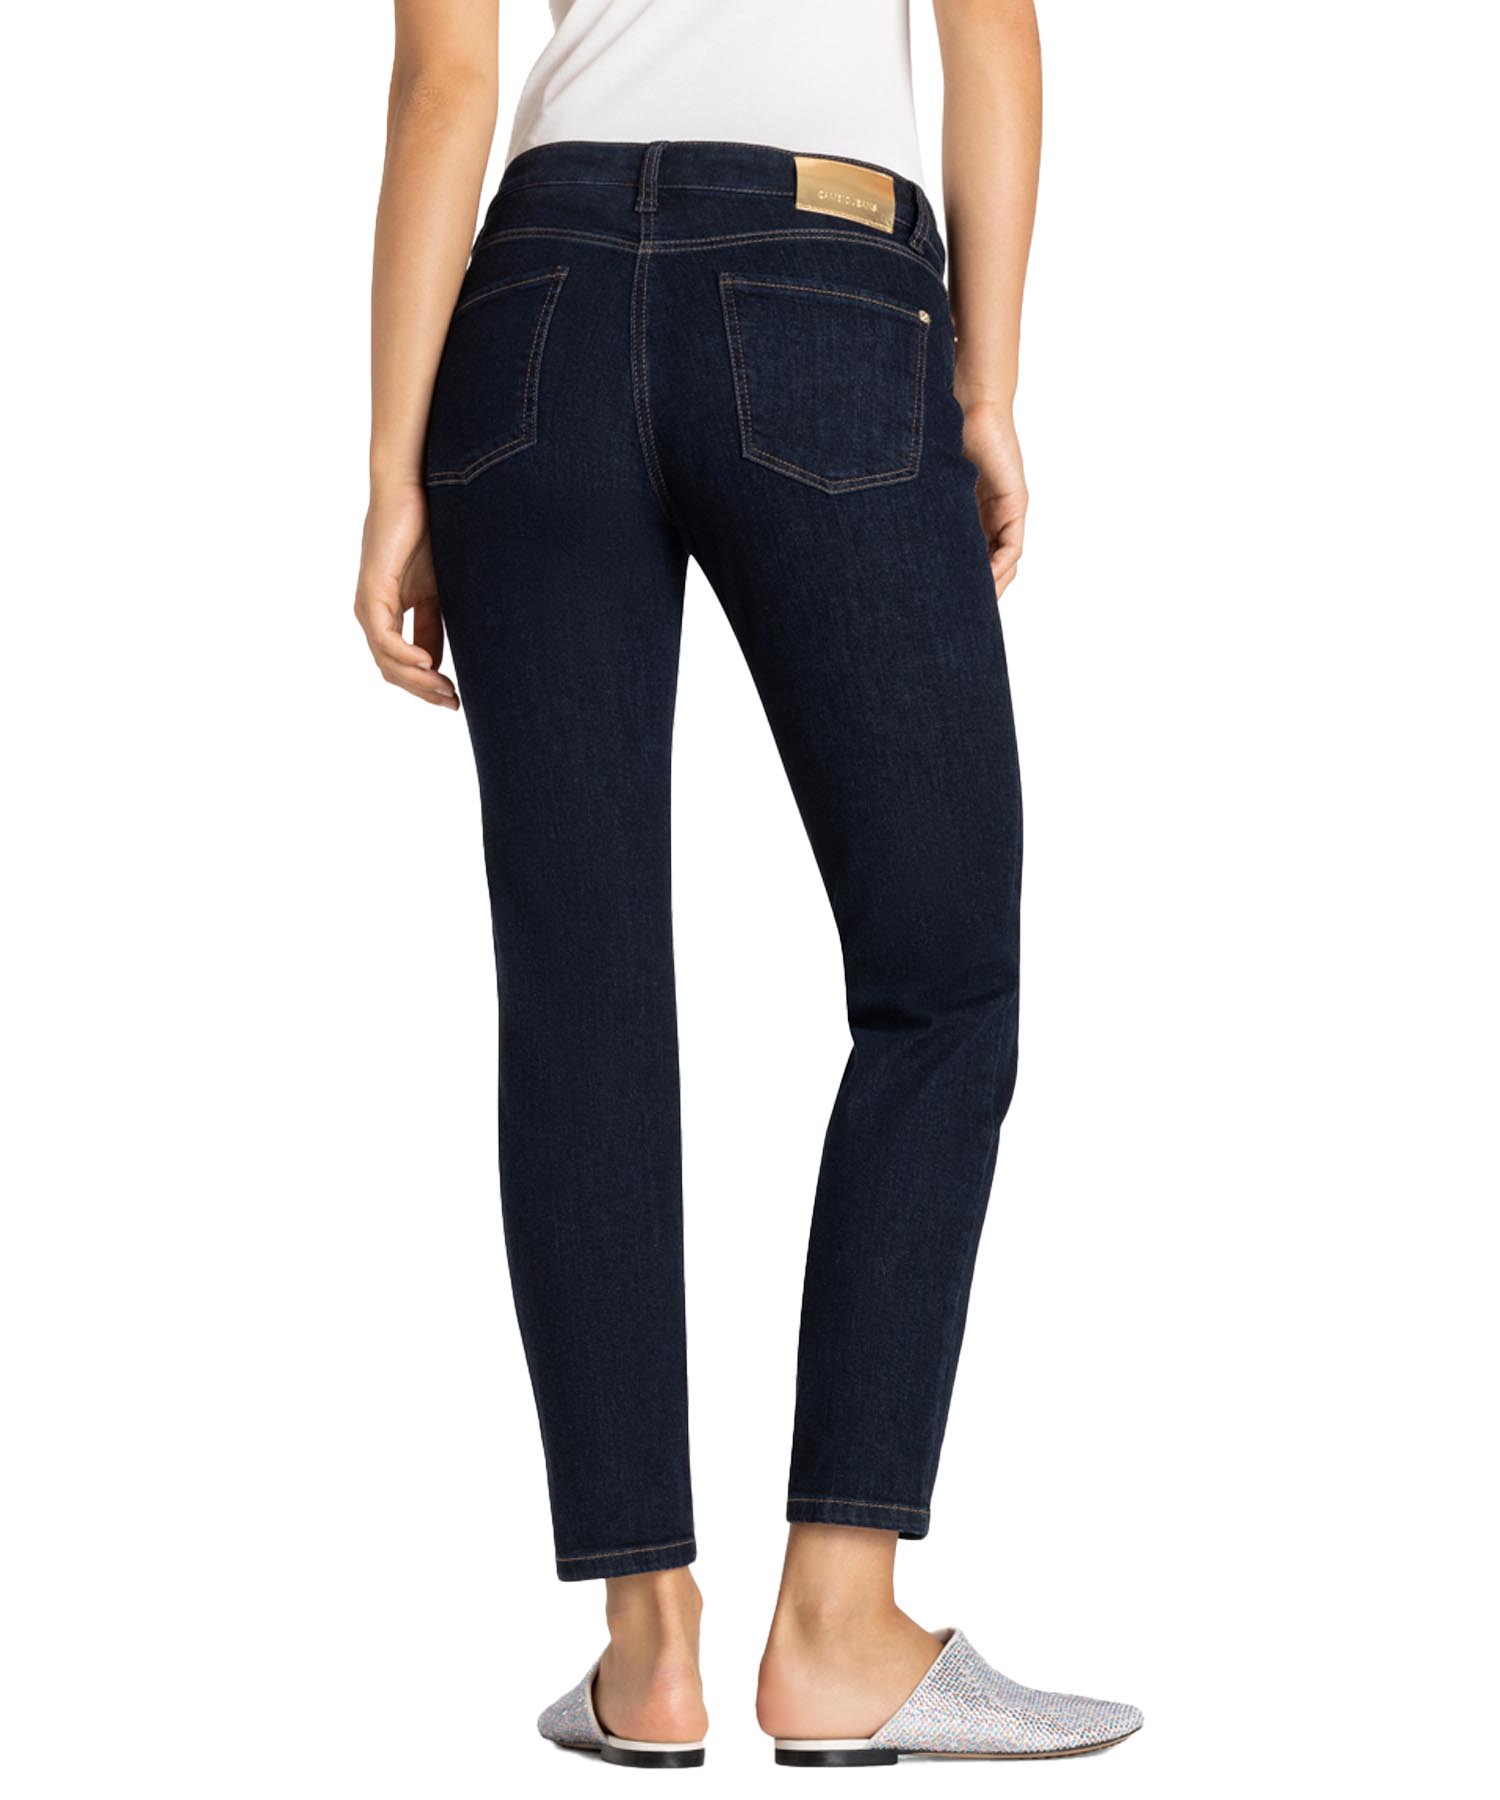 Cambio Jeans Piper cropped in dunkelblauer Waschung